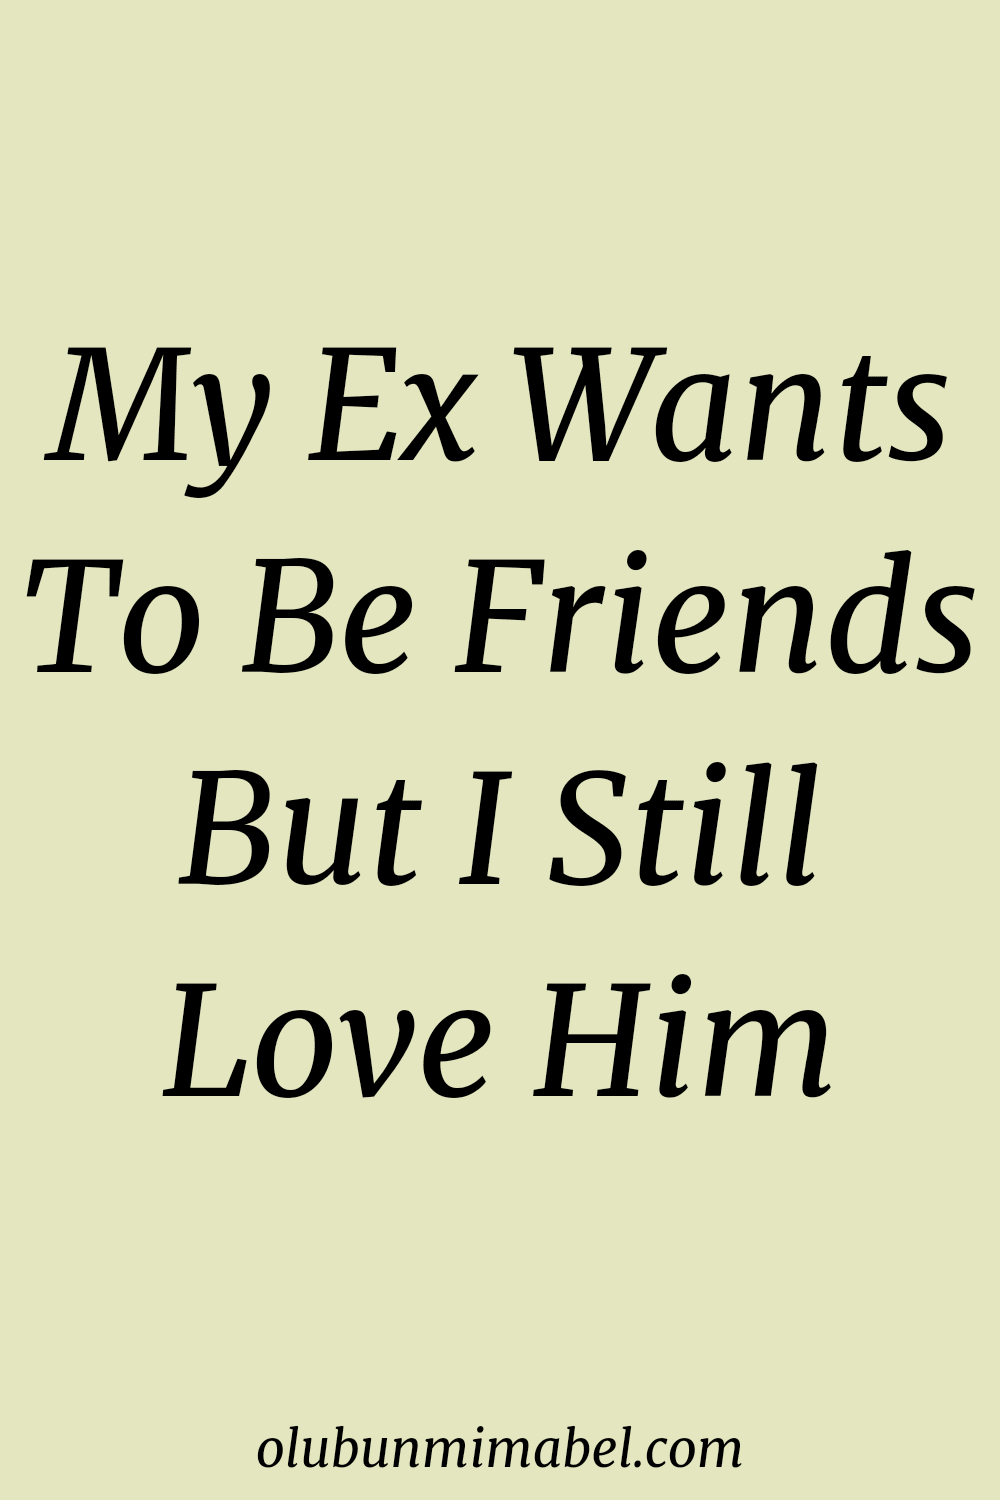 My Ex Wants To Be Friends But I still Love Him